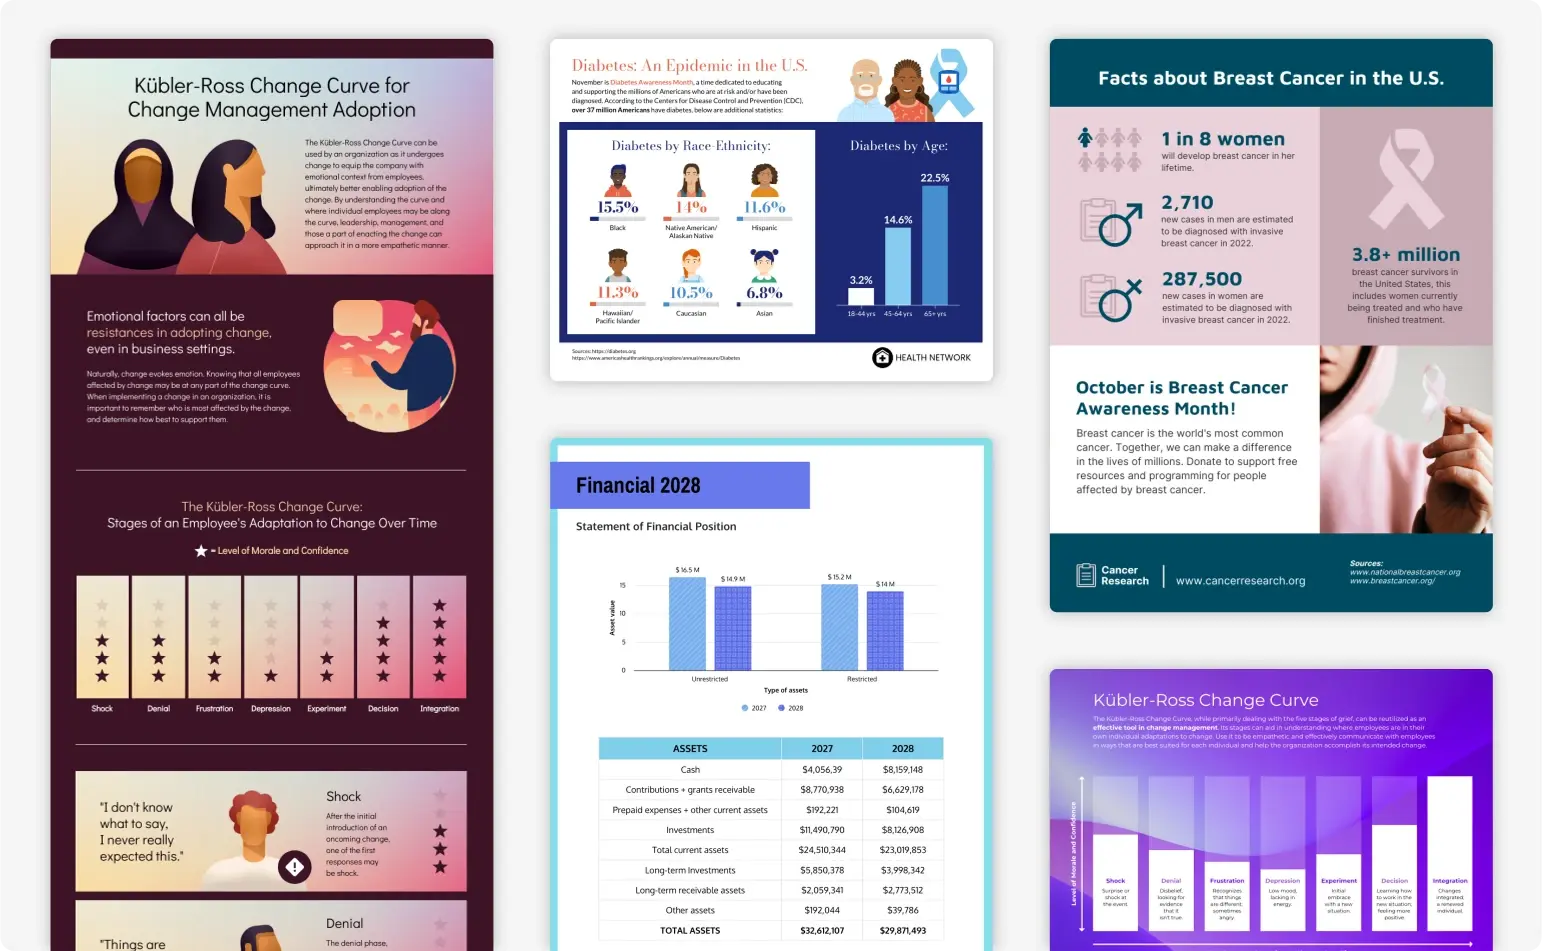 Some infographic and report templates offered by Venngage.